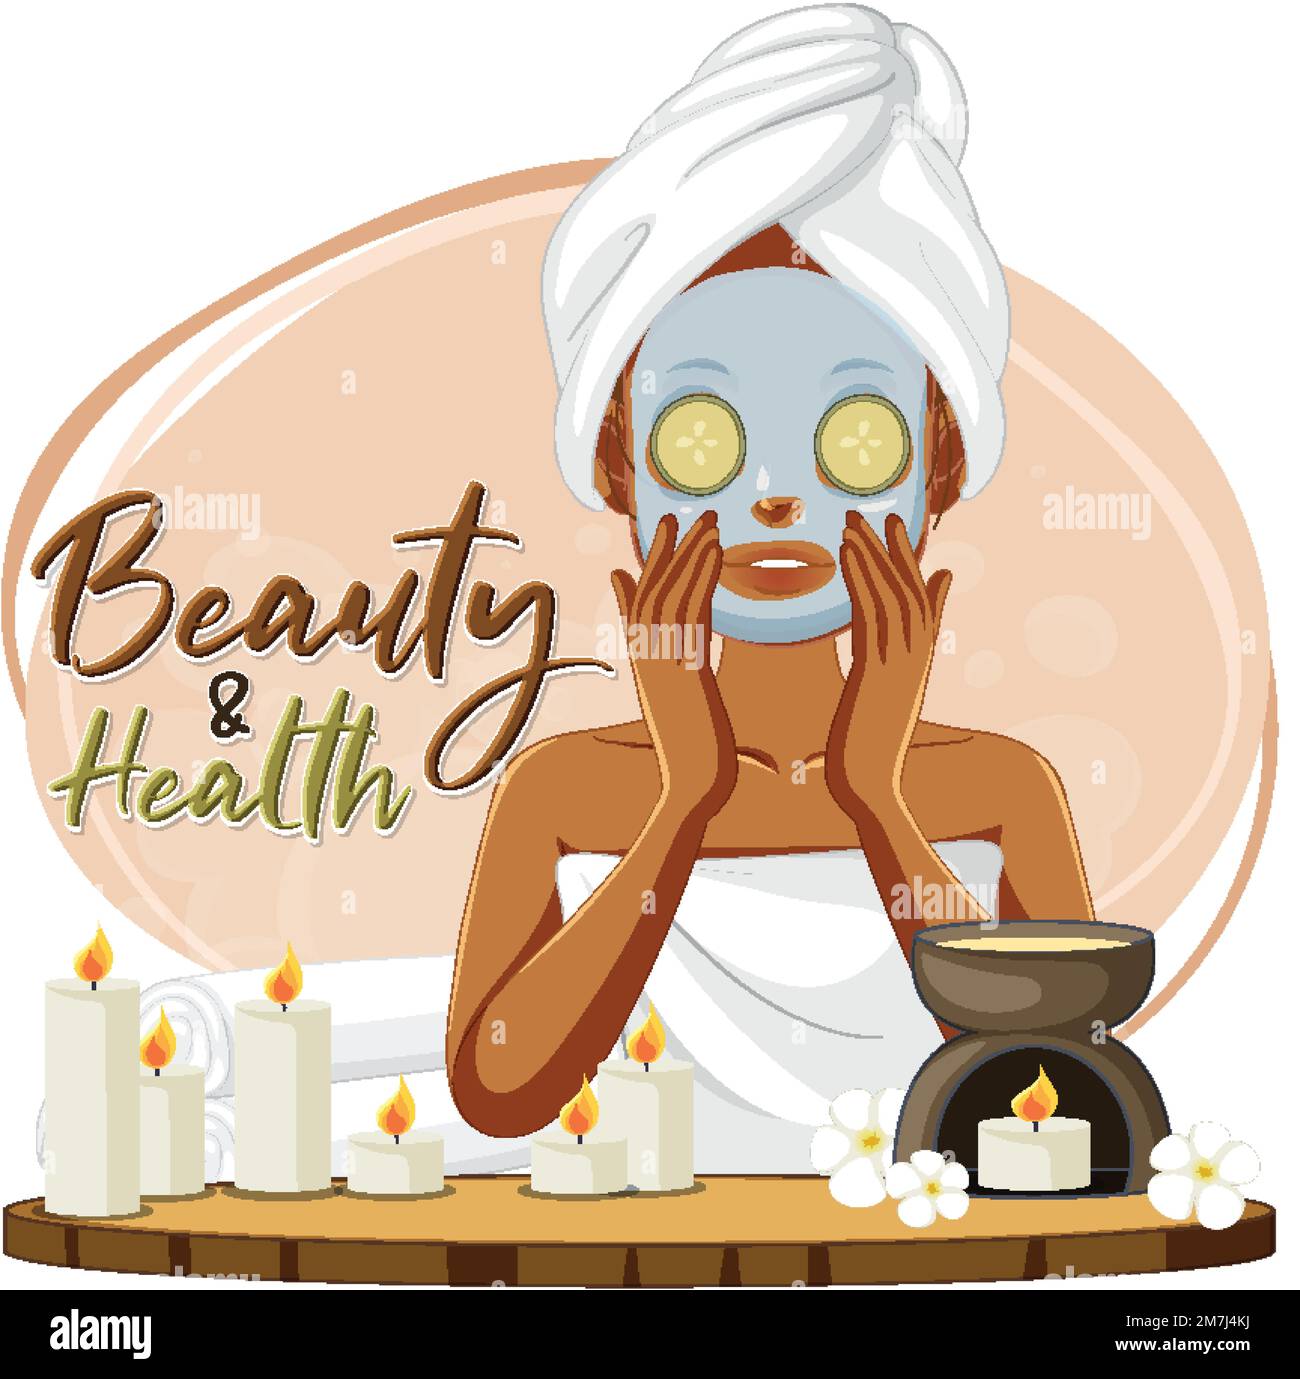 Woman with facial mask illustration Stock Vector